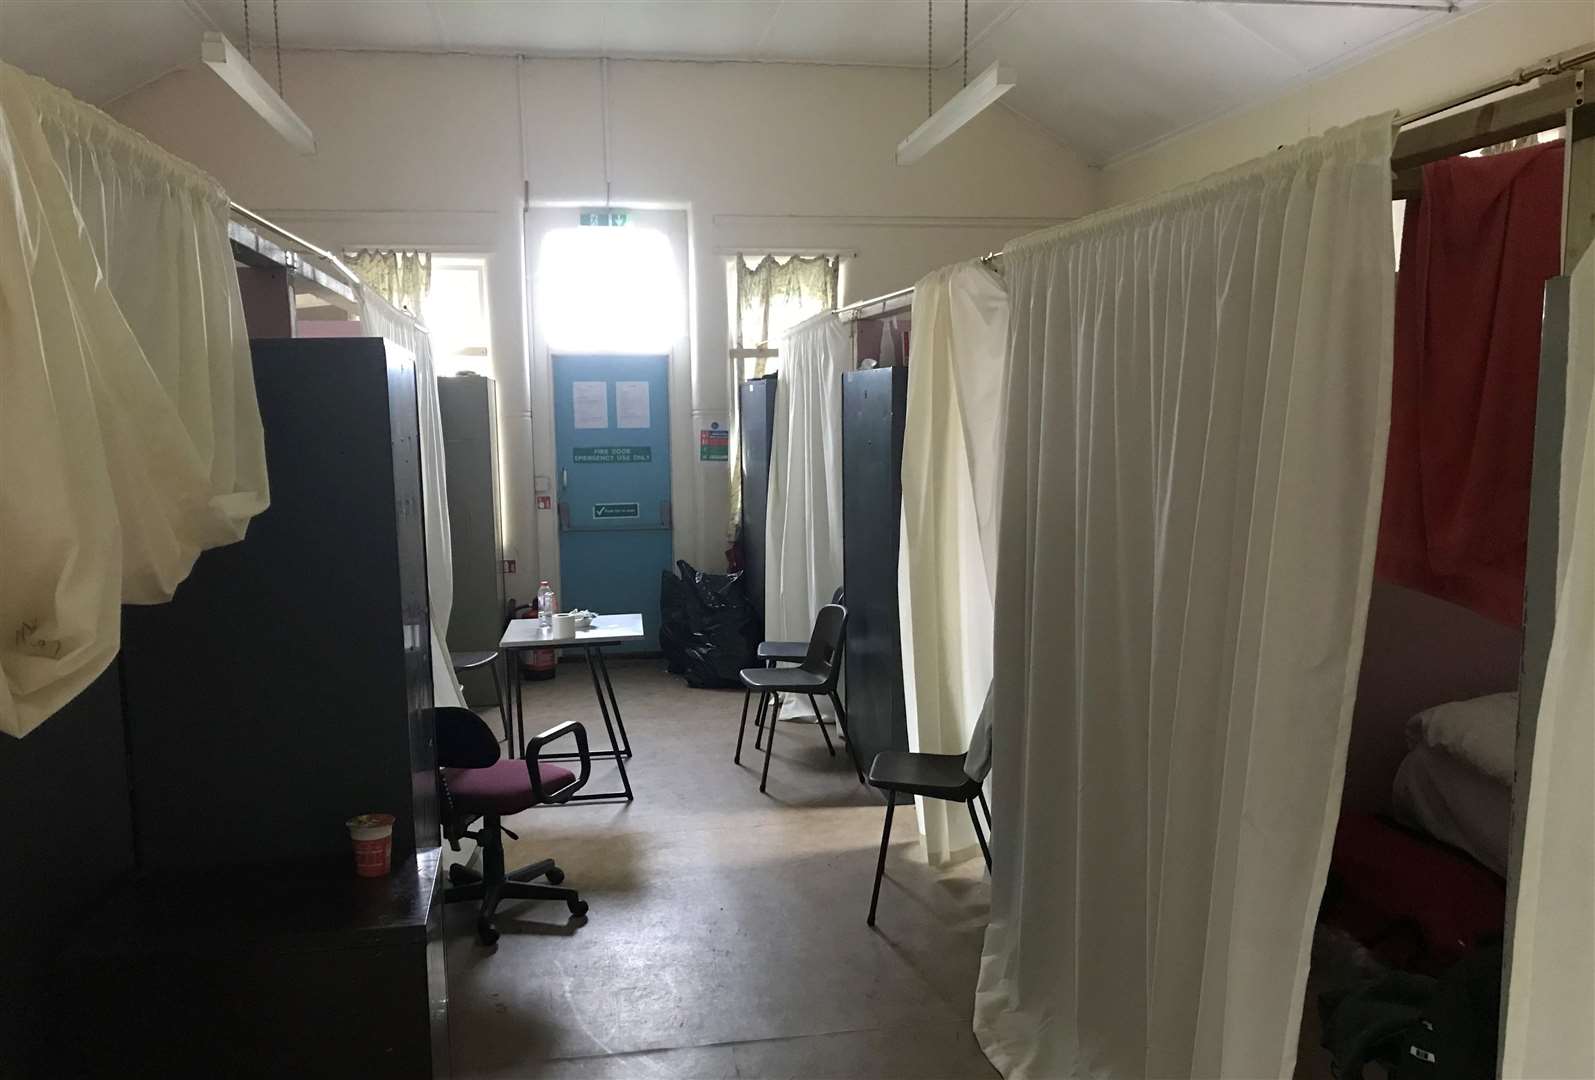 Conditions inside Napier Barracks in Folkestone. Picture: Independent Chief Inspector of Borders and Immigration